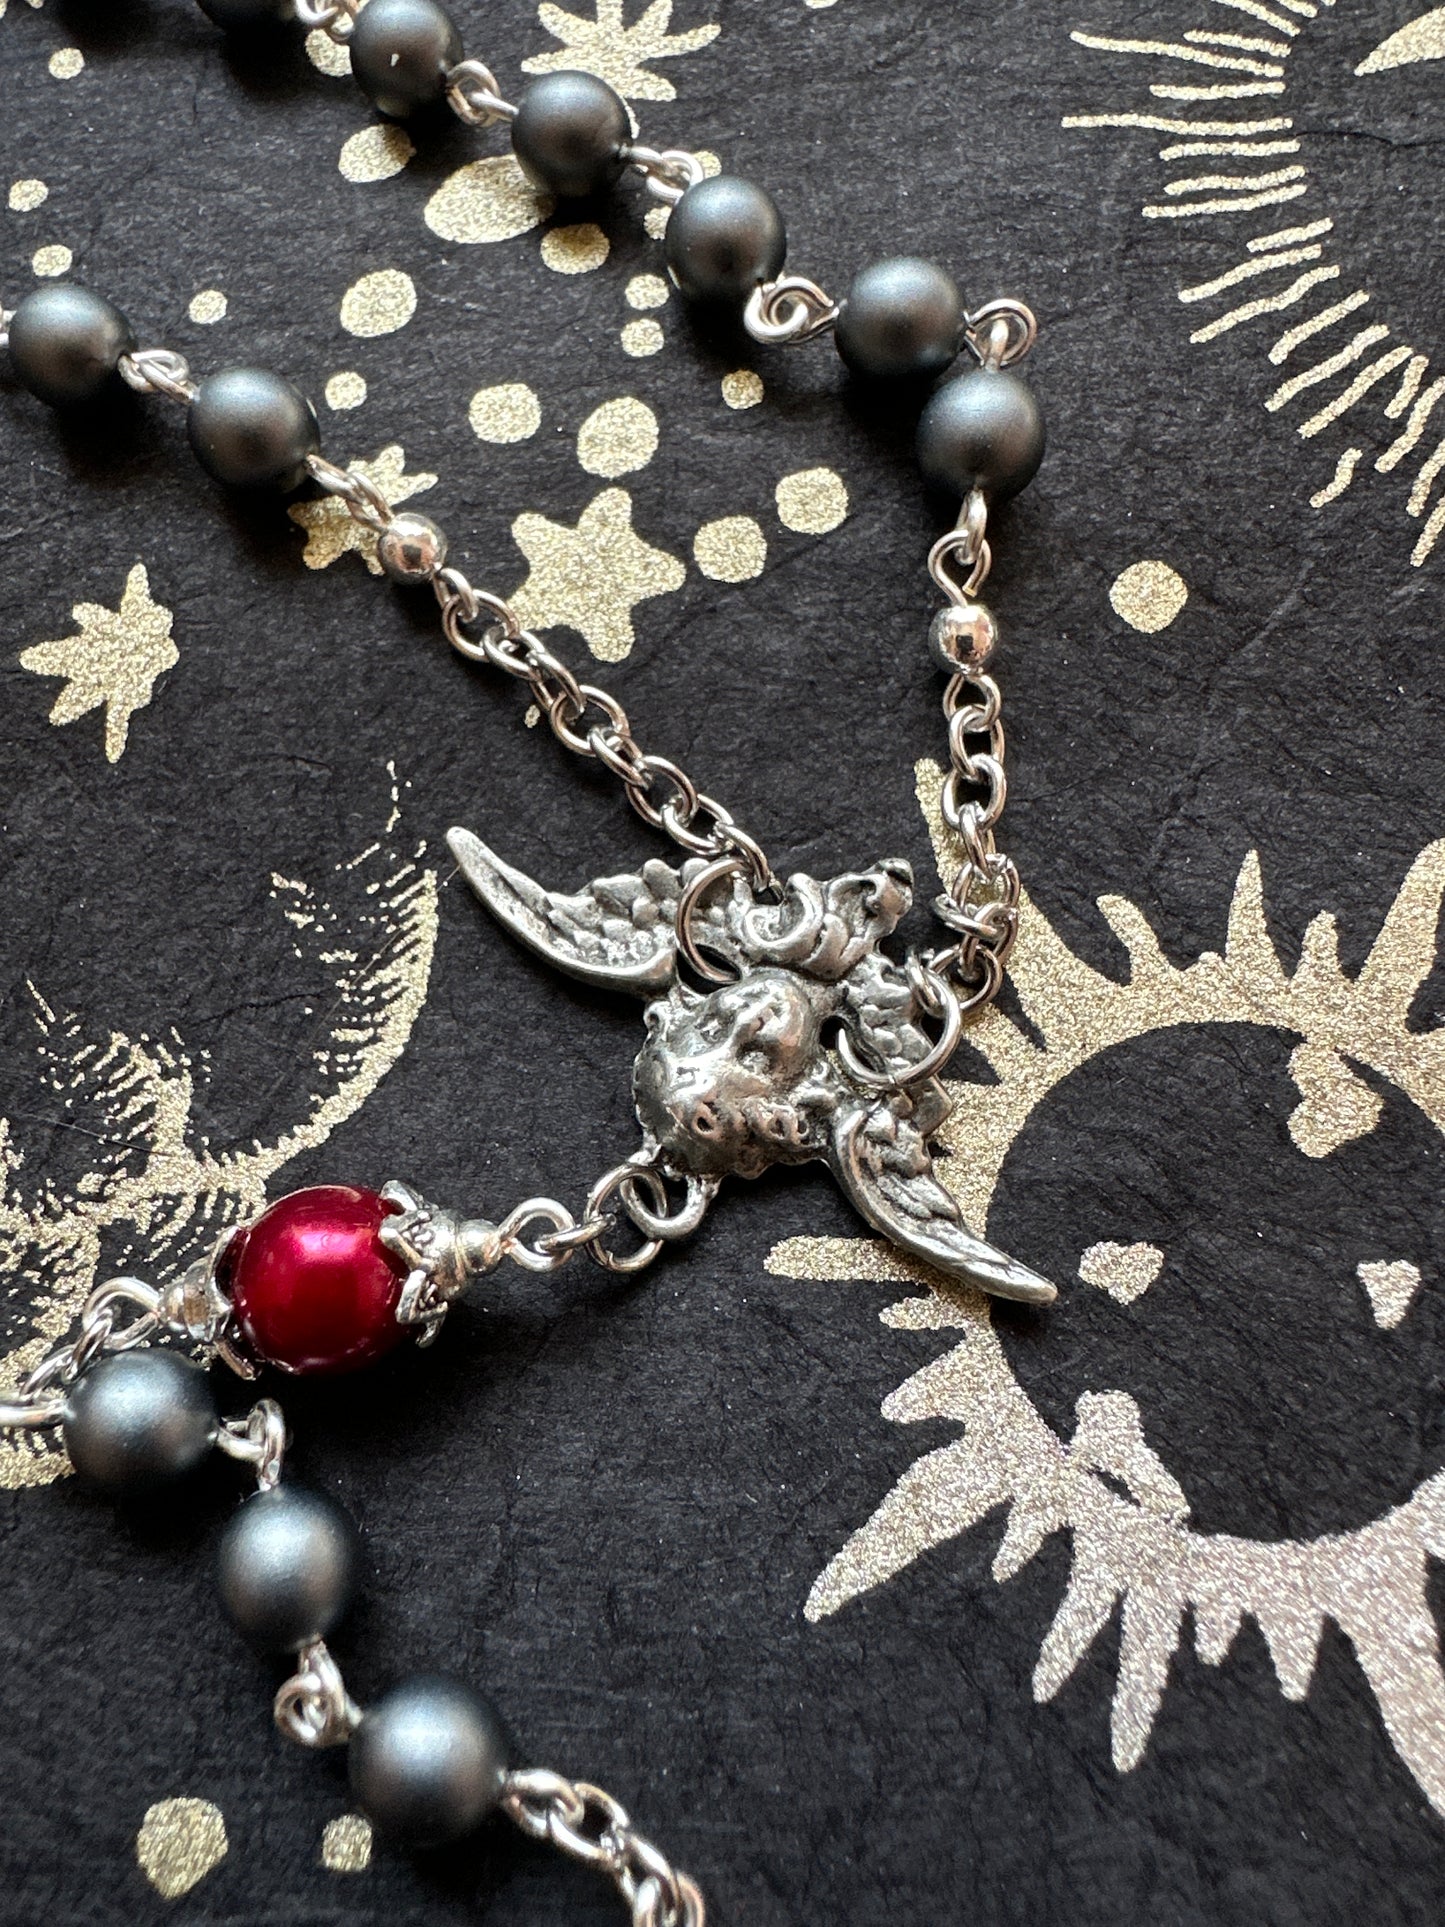 Fallen Angel rosary with snake pendant